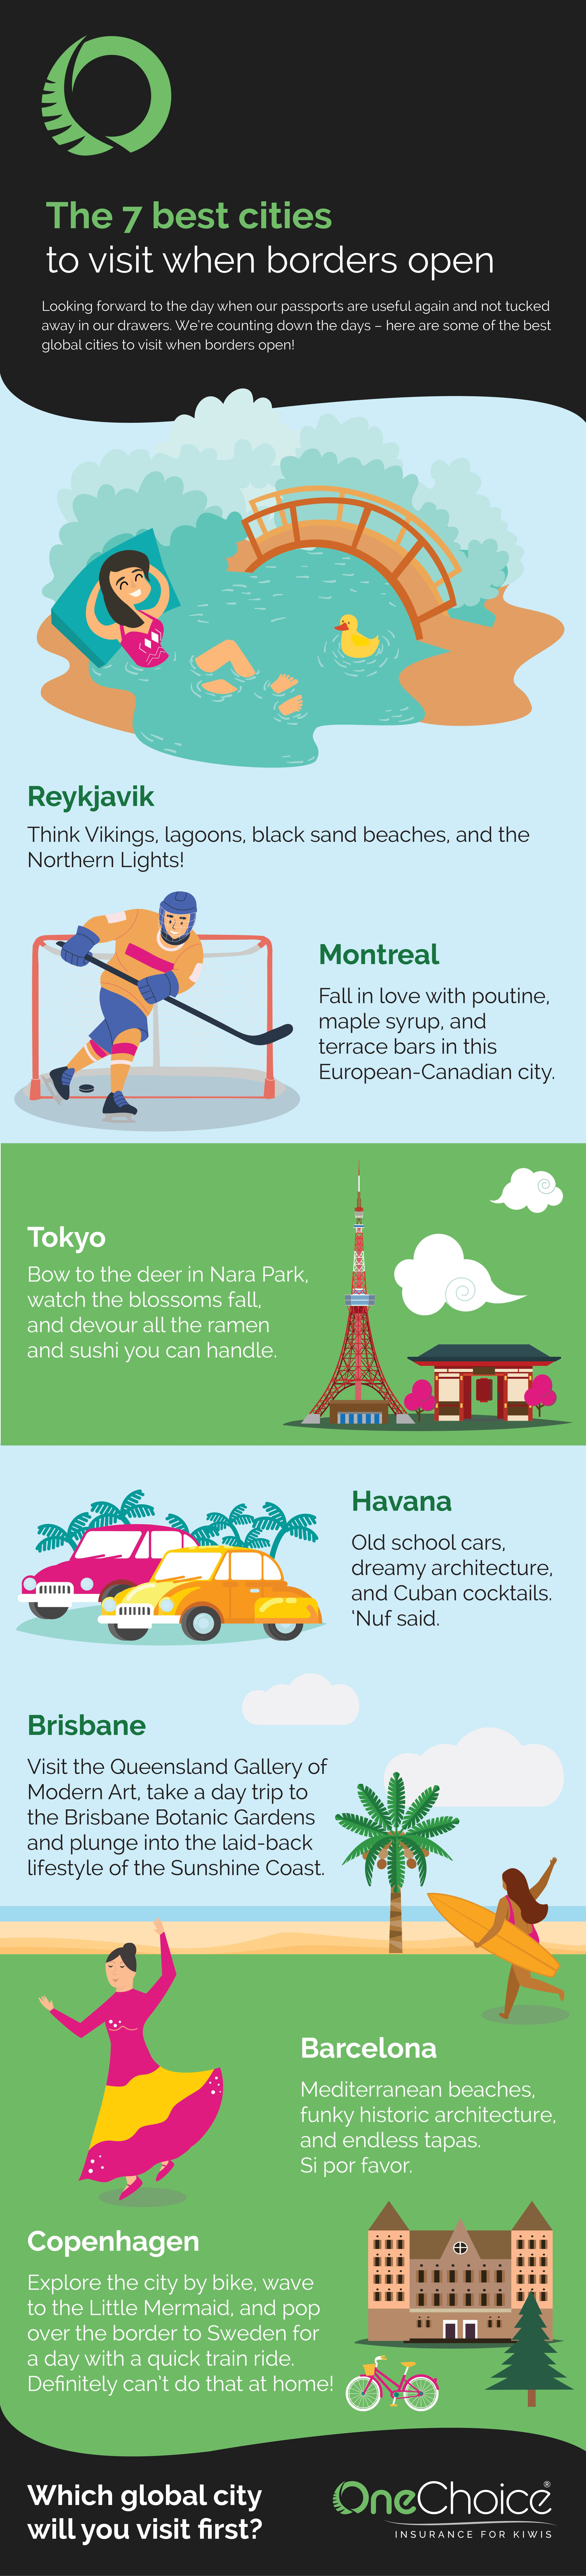 Infographic of 7 best cities to visit around the world.